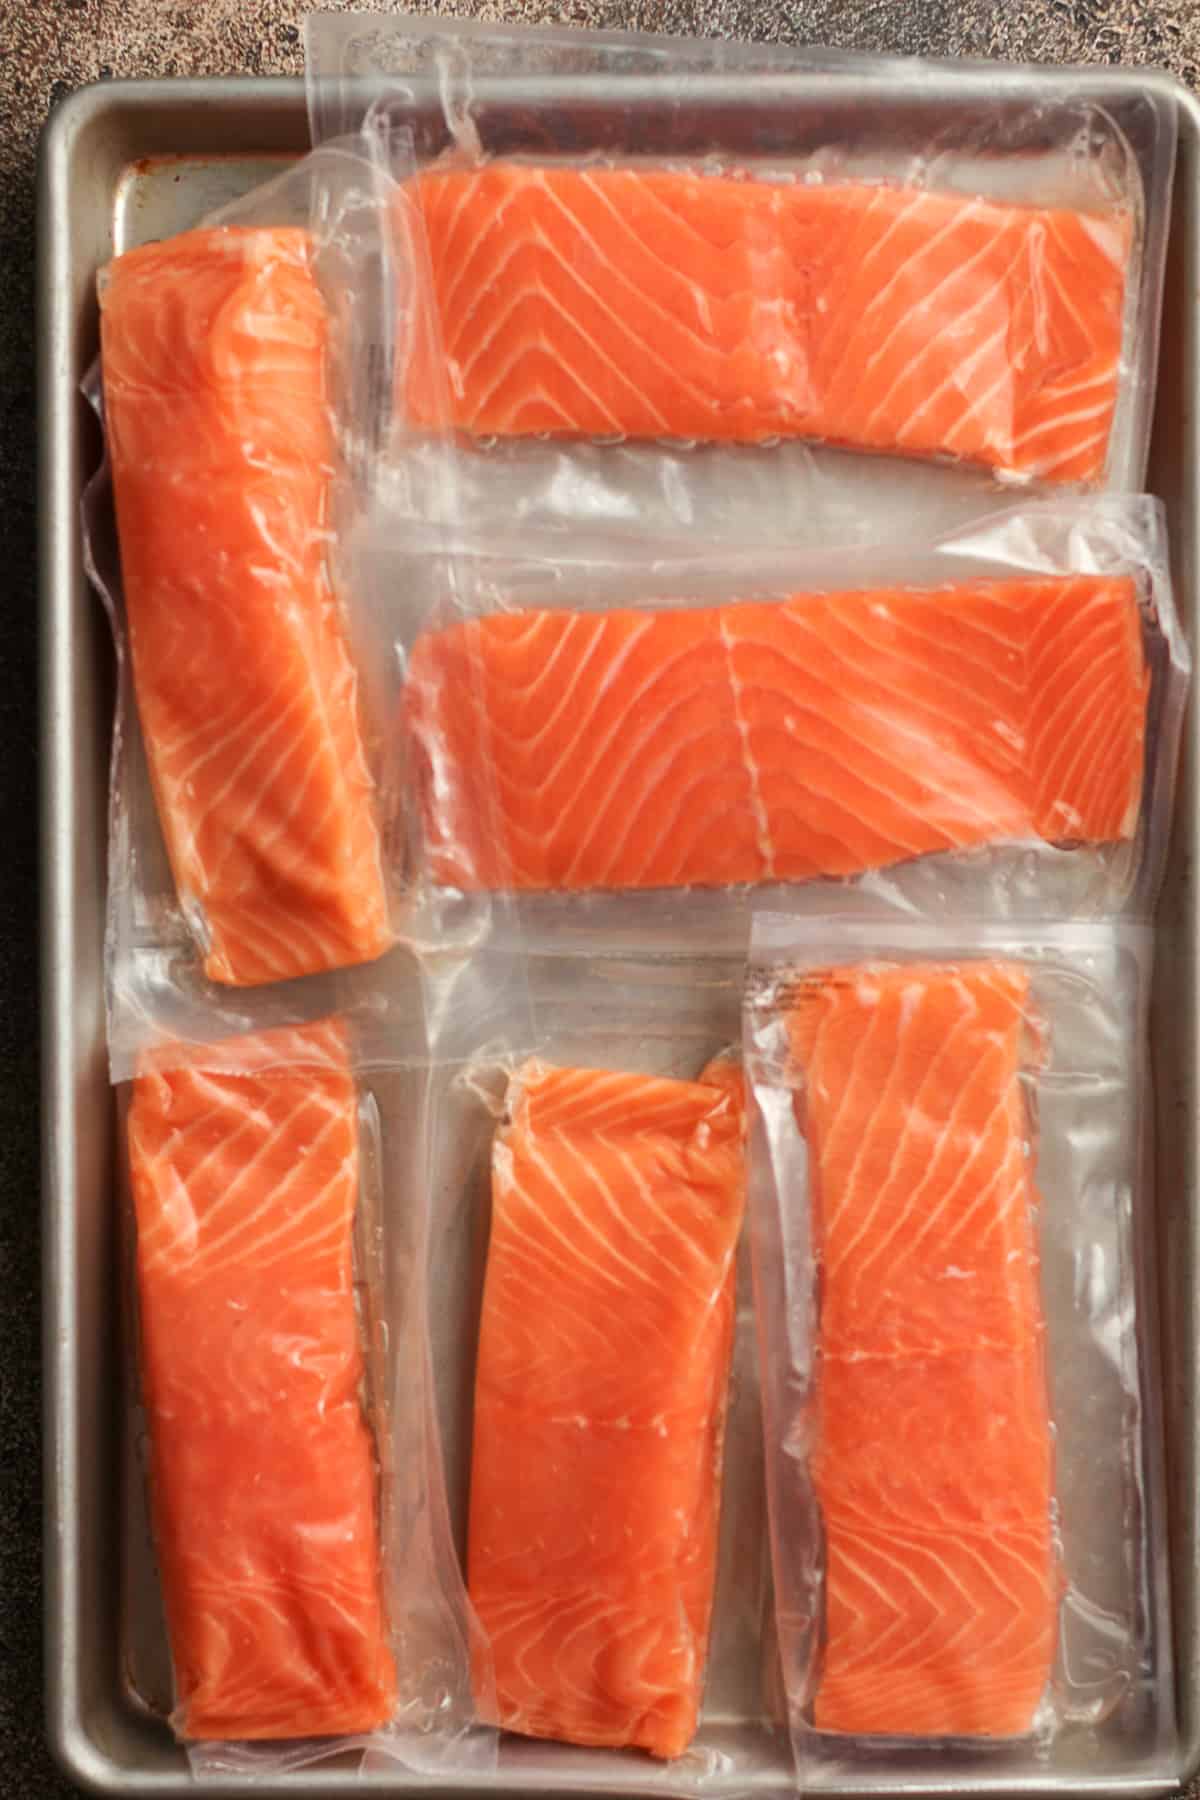 Six packaged pieces of salmon on a sheet pan.